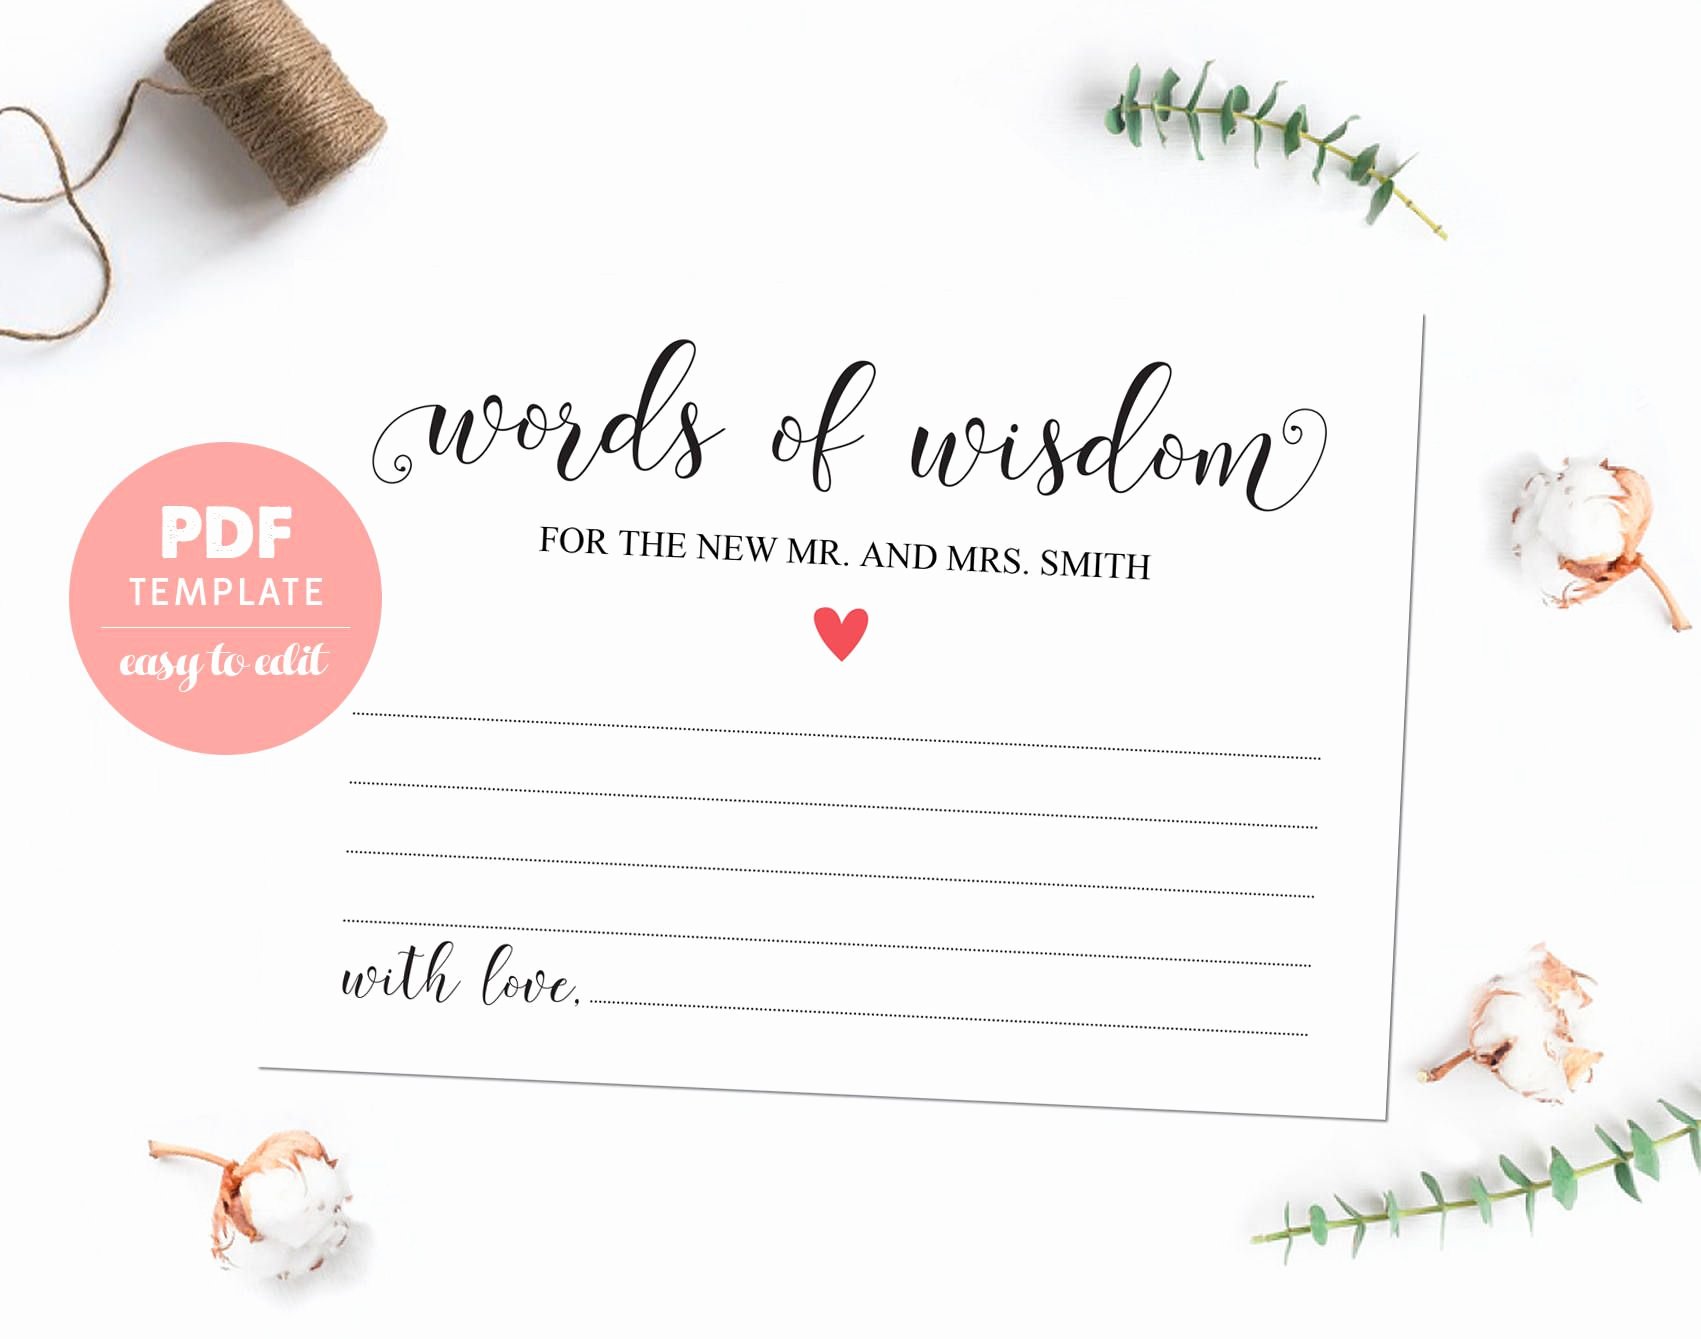 bridesmaid card template inspirational wedding wishes pdf template card words of wisdom card of bridesmaid card template